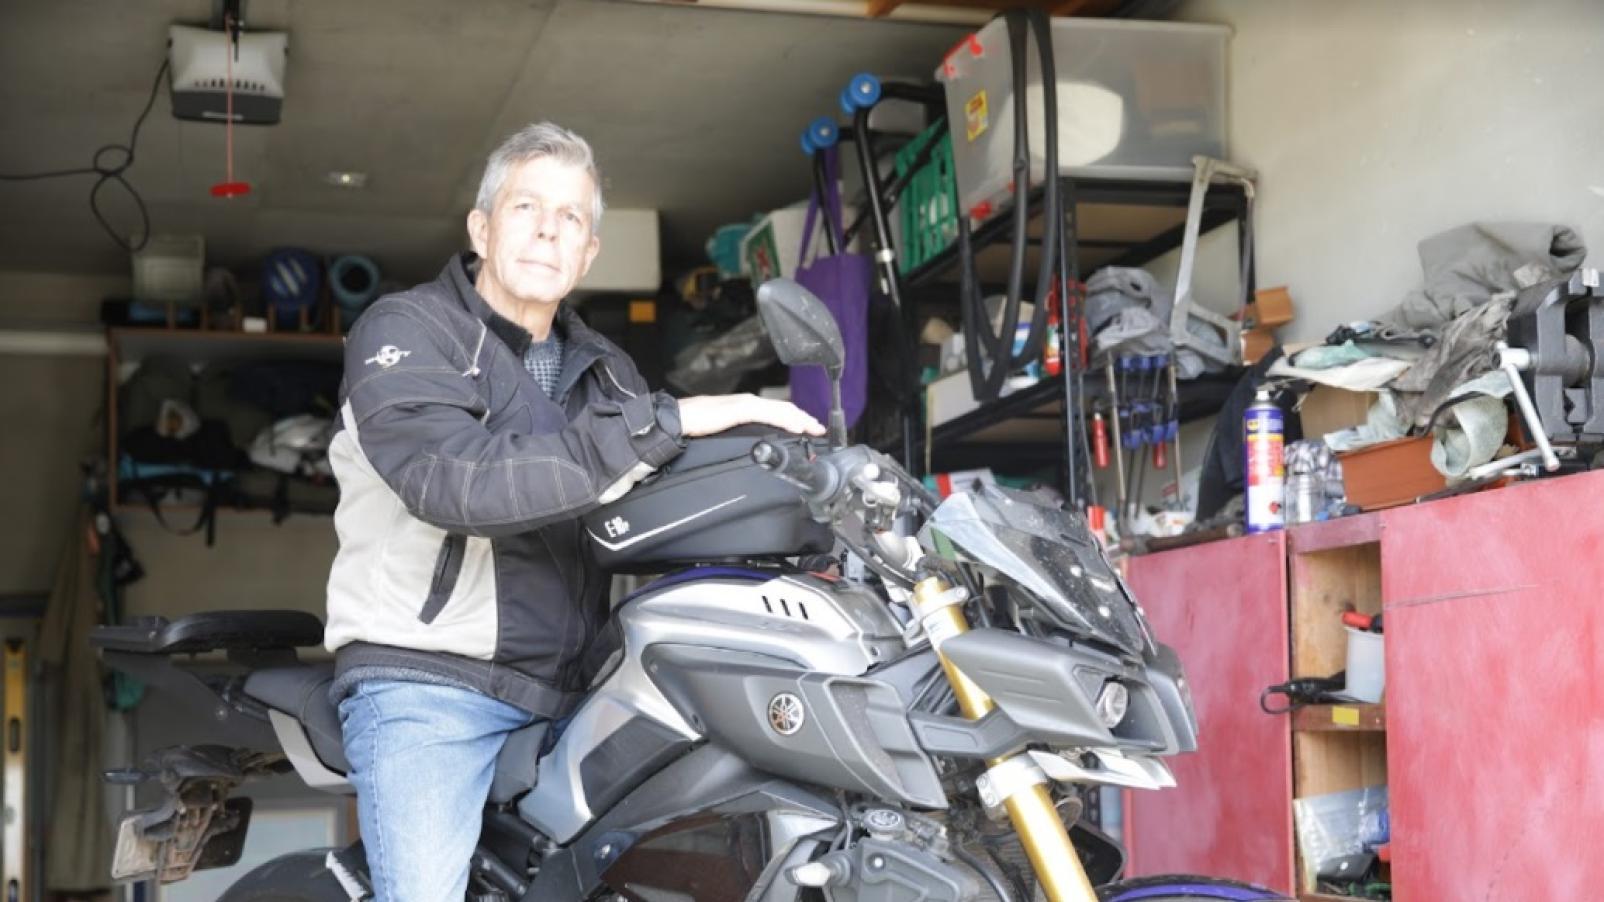 A man wearing motorcycle safety clothing sitting on his bike in his garage